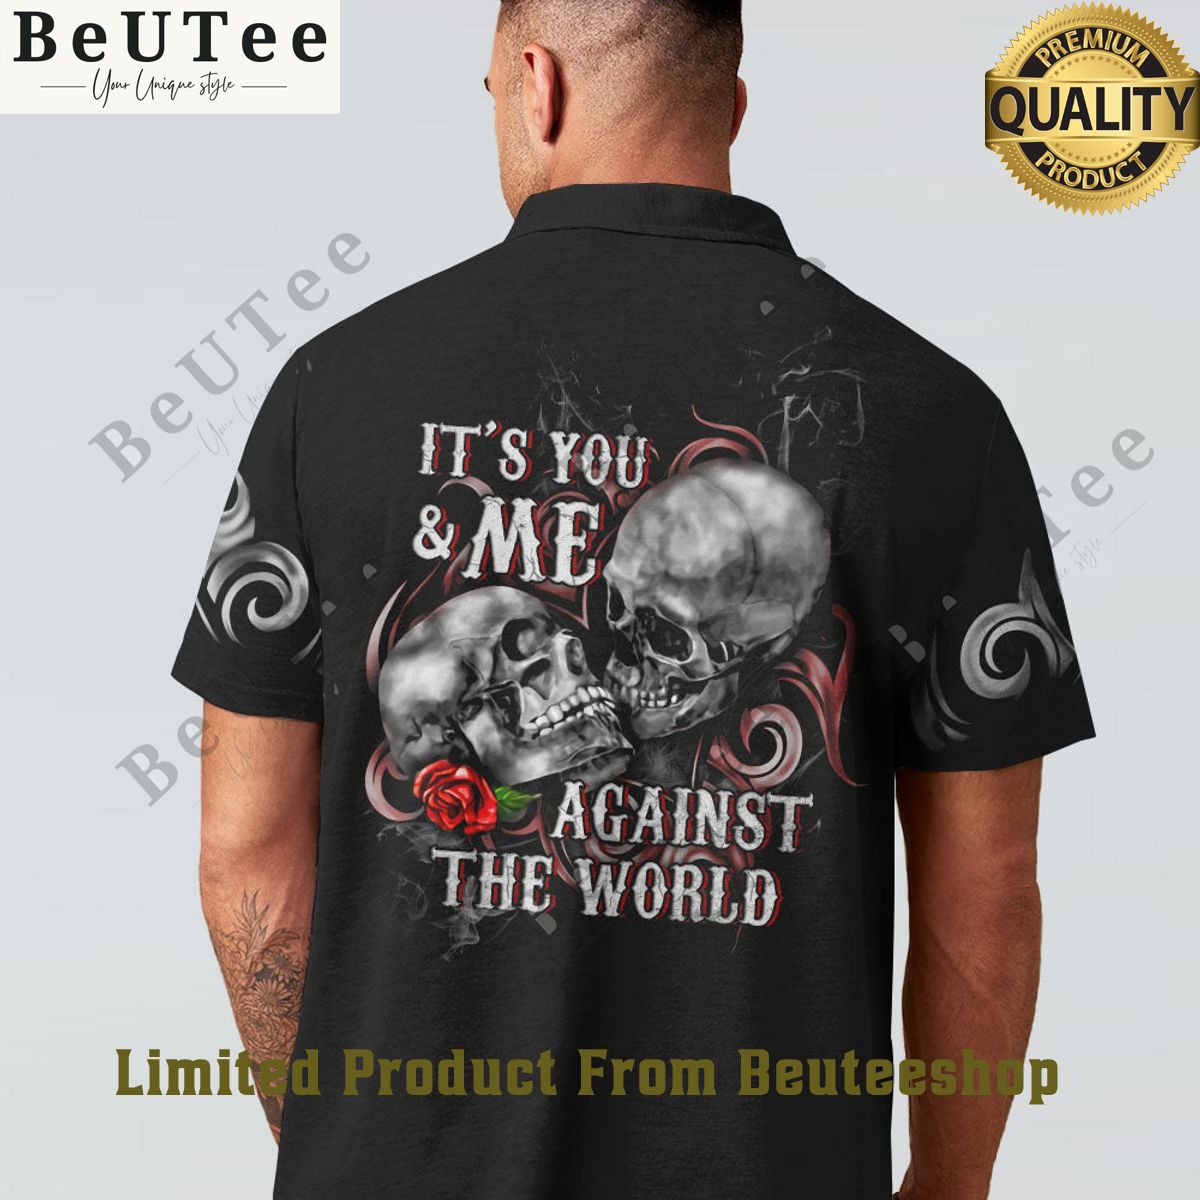 its you and me against the world couple aop polo shirt 1 ltPiq.jpg